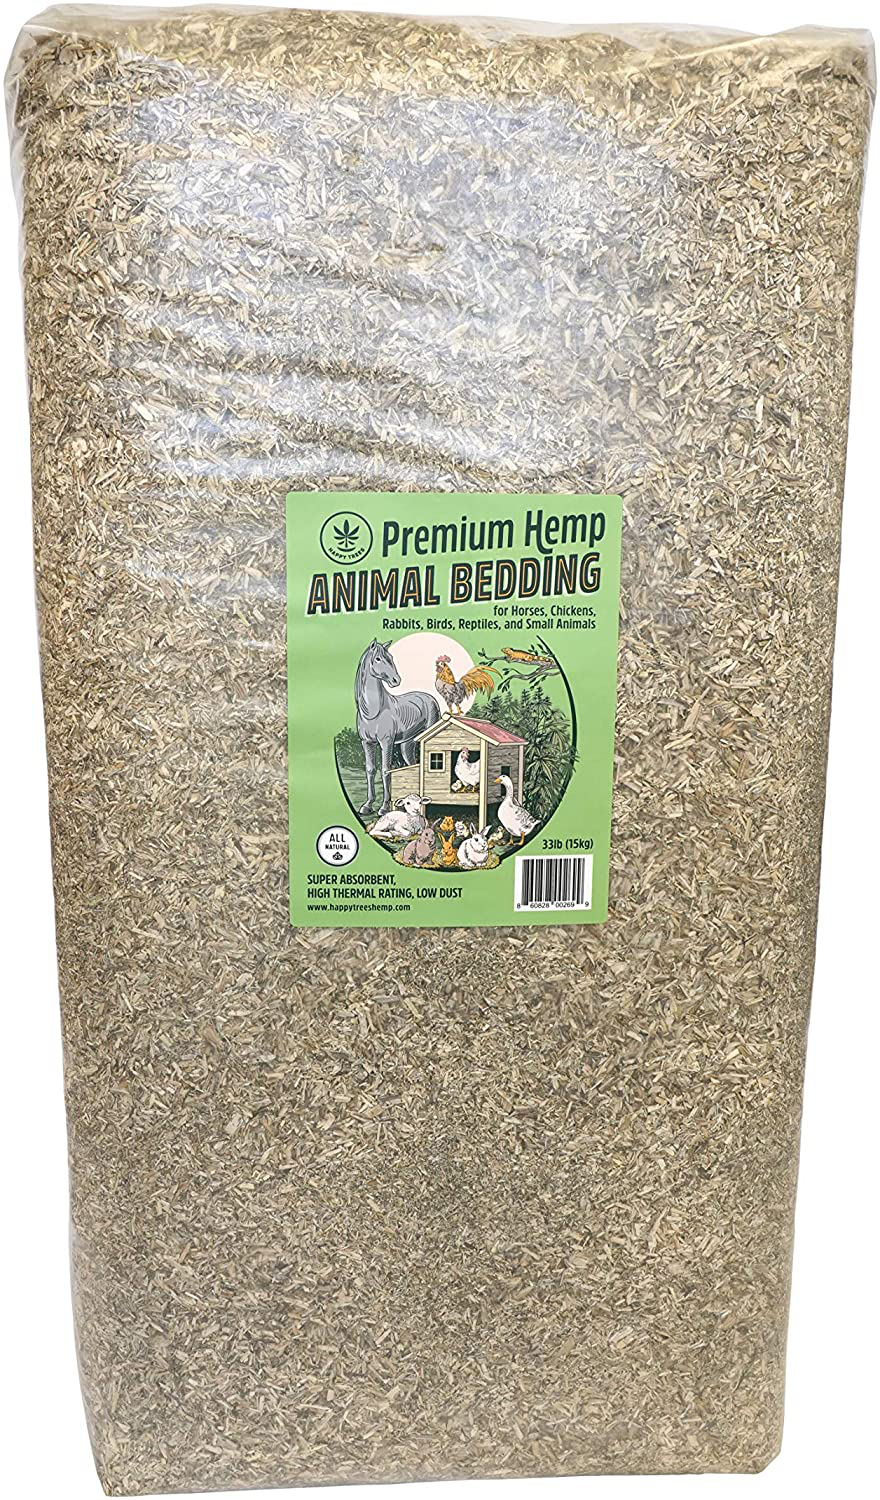 Happy Trees Premium Hemp Animal Bedding for Chicken Coop, Horses, Rabbits, Hamsters, Reptiles, Small Pets - Highly Absorbent, All Natural, Chemical-Free, Low Dust, Eco-Friendly, Animals & Pet Supplies > Pet Supplies > Small Animal Supplies > Small Animal Bedding Happy Trees Hemp 33lb  